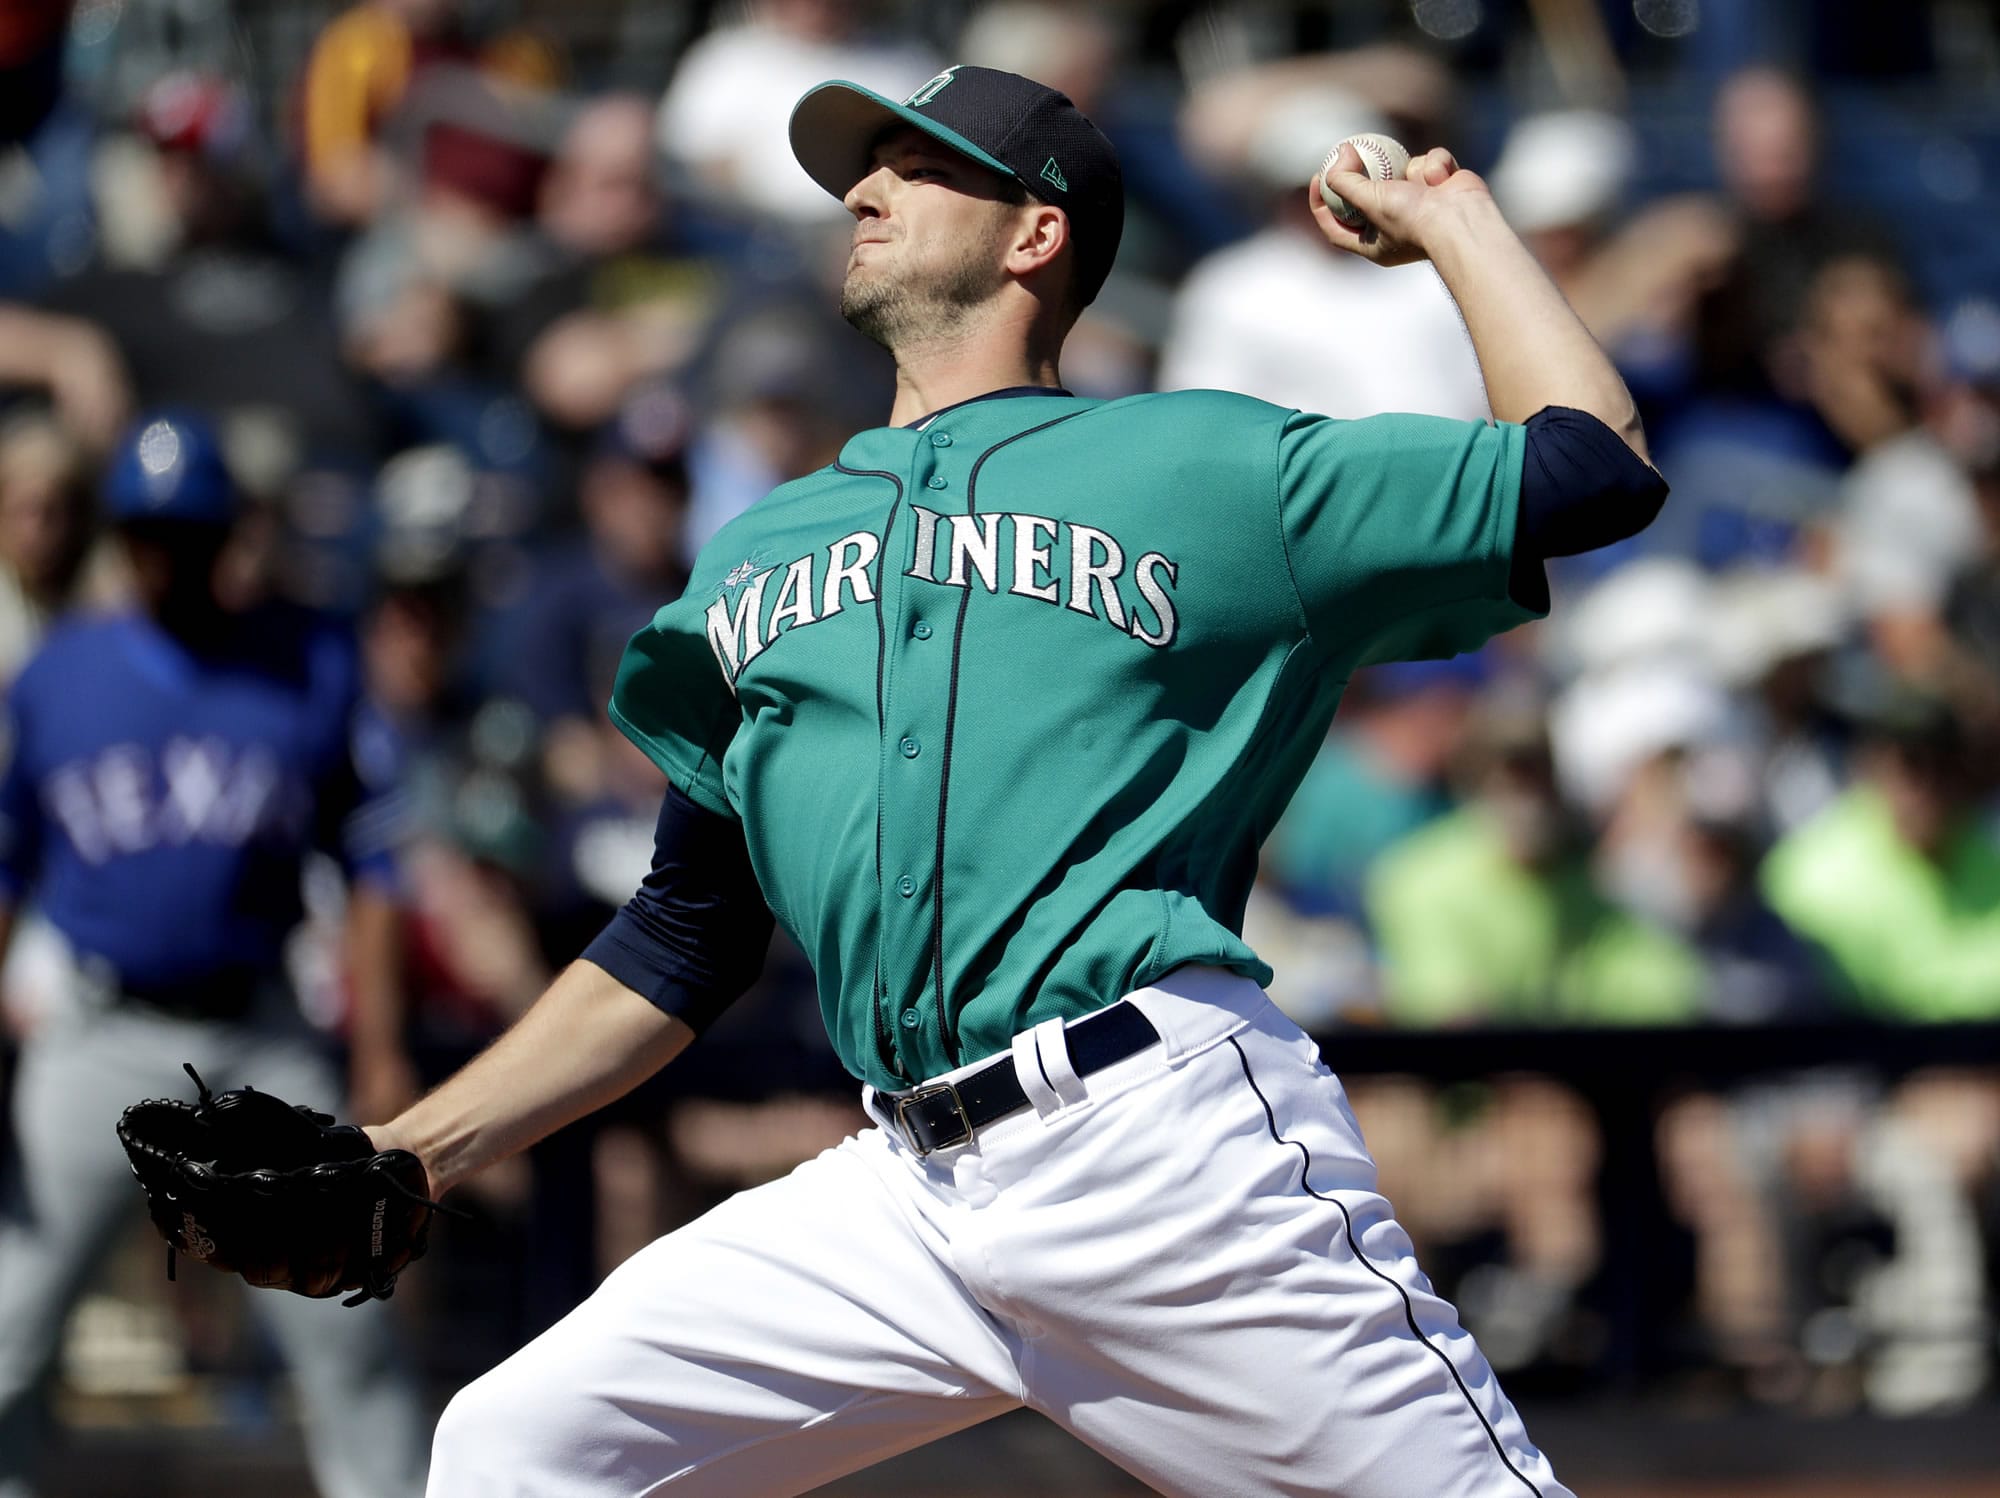 Seattle Mariners starting pitcher Drew Smyly will begin the season on the disabled list and could be out up to two months because of a strained left elbow.